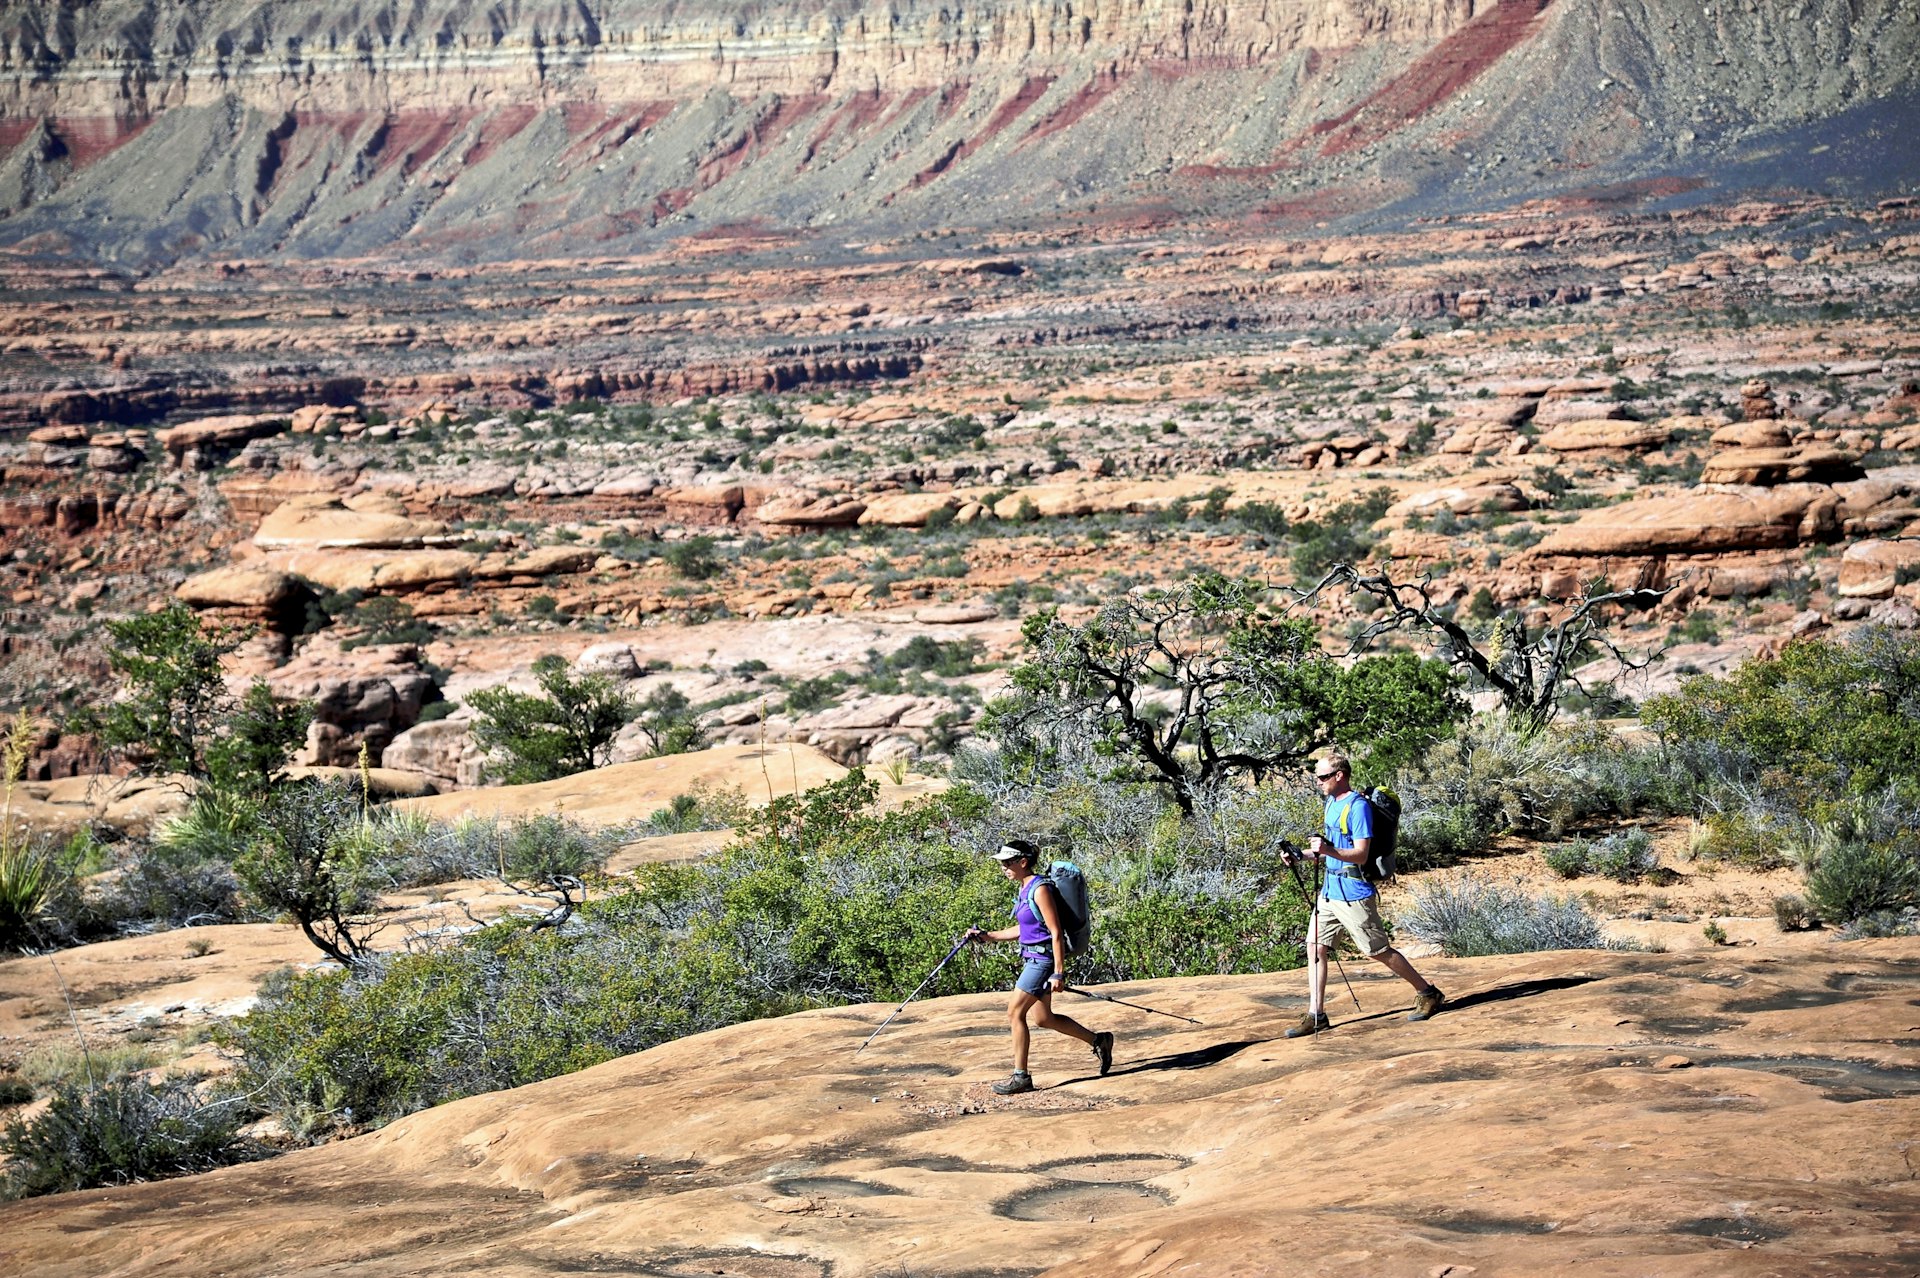 Hikers on the sandstone Esplanade of the Thunder River Trail below the North Rim of the Grand Canyon outside Fredonia, Arizona November 2011.